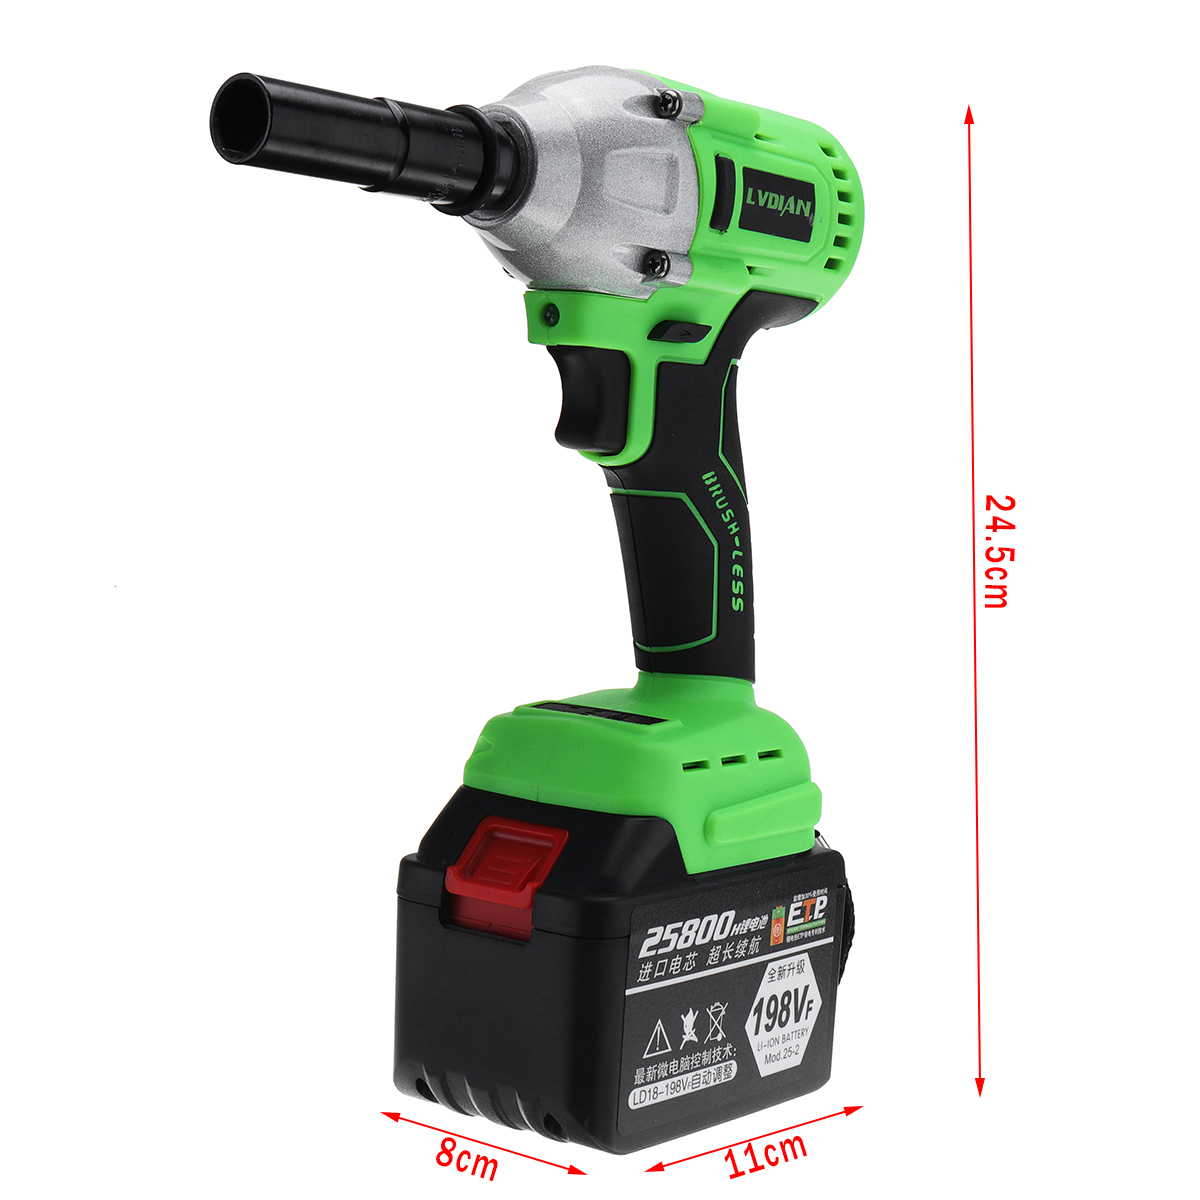 98128188VF-Brushless-Cordless-Impact-Wrench-Drill-LED-Light-Li-Ion-Battery-Electric-Impact-Wrench-1404354-5